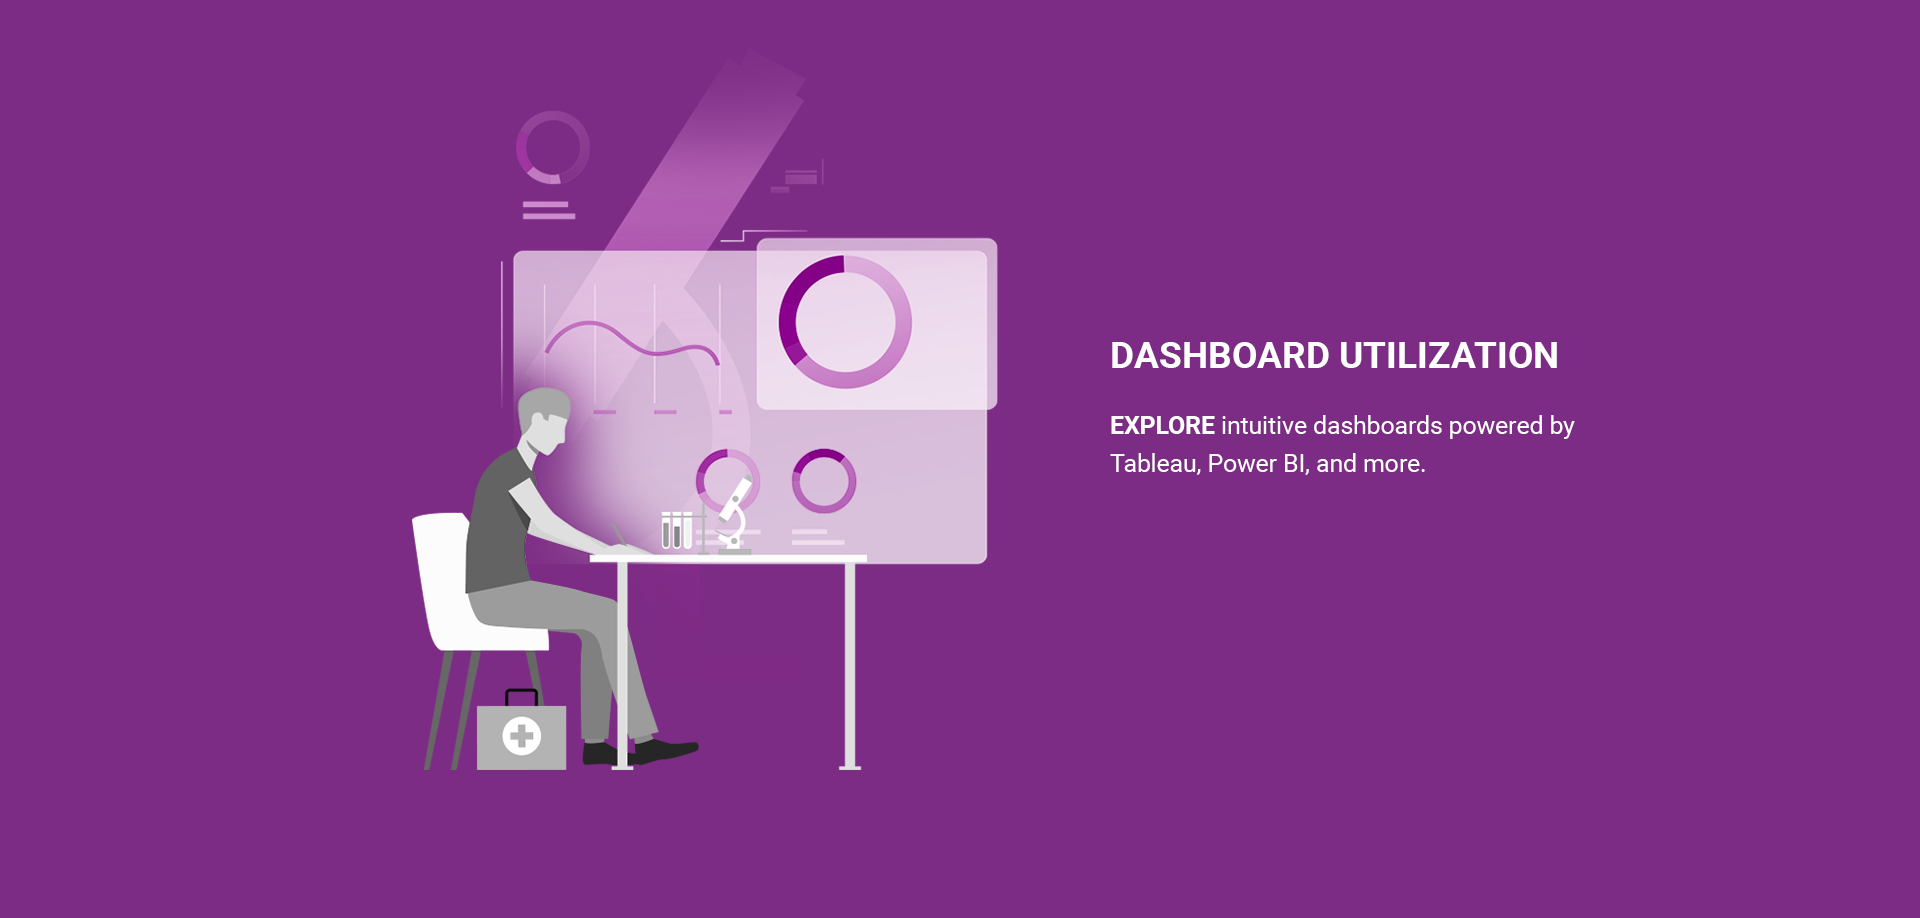 Purple graphic of a professional analyzing a large screen dashboard with various charts and metrics, accompanied by the text "DASHBOARD UTILIZATION."